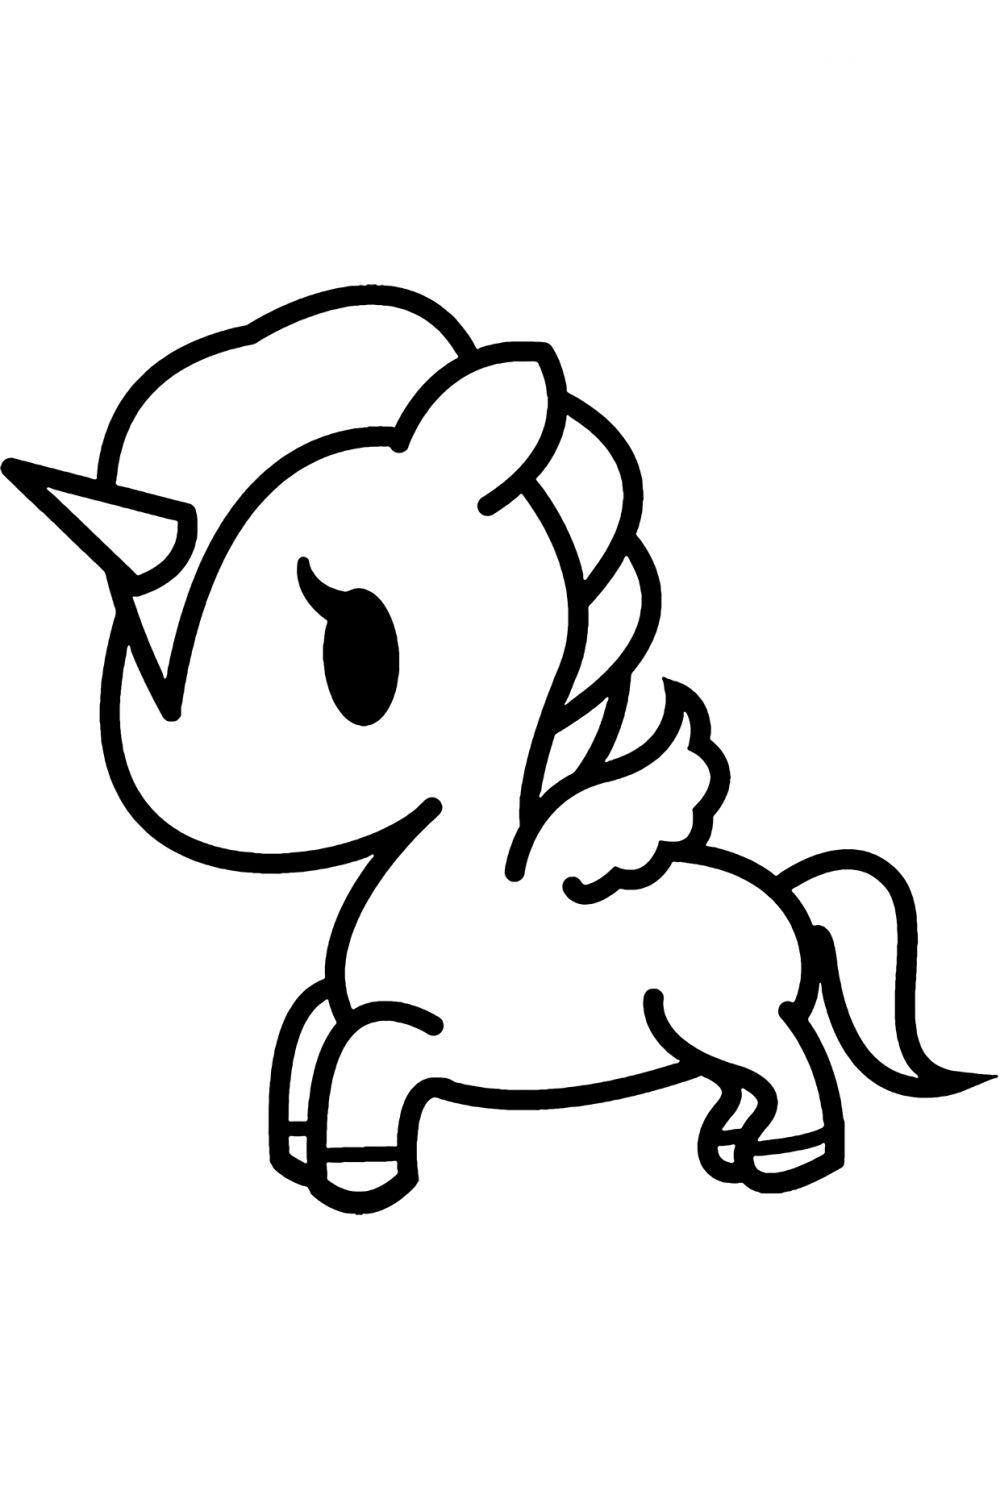 Cute Unicorn Coloring Pages   YouLoveIt.com   Coloring Home